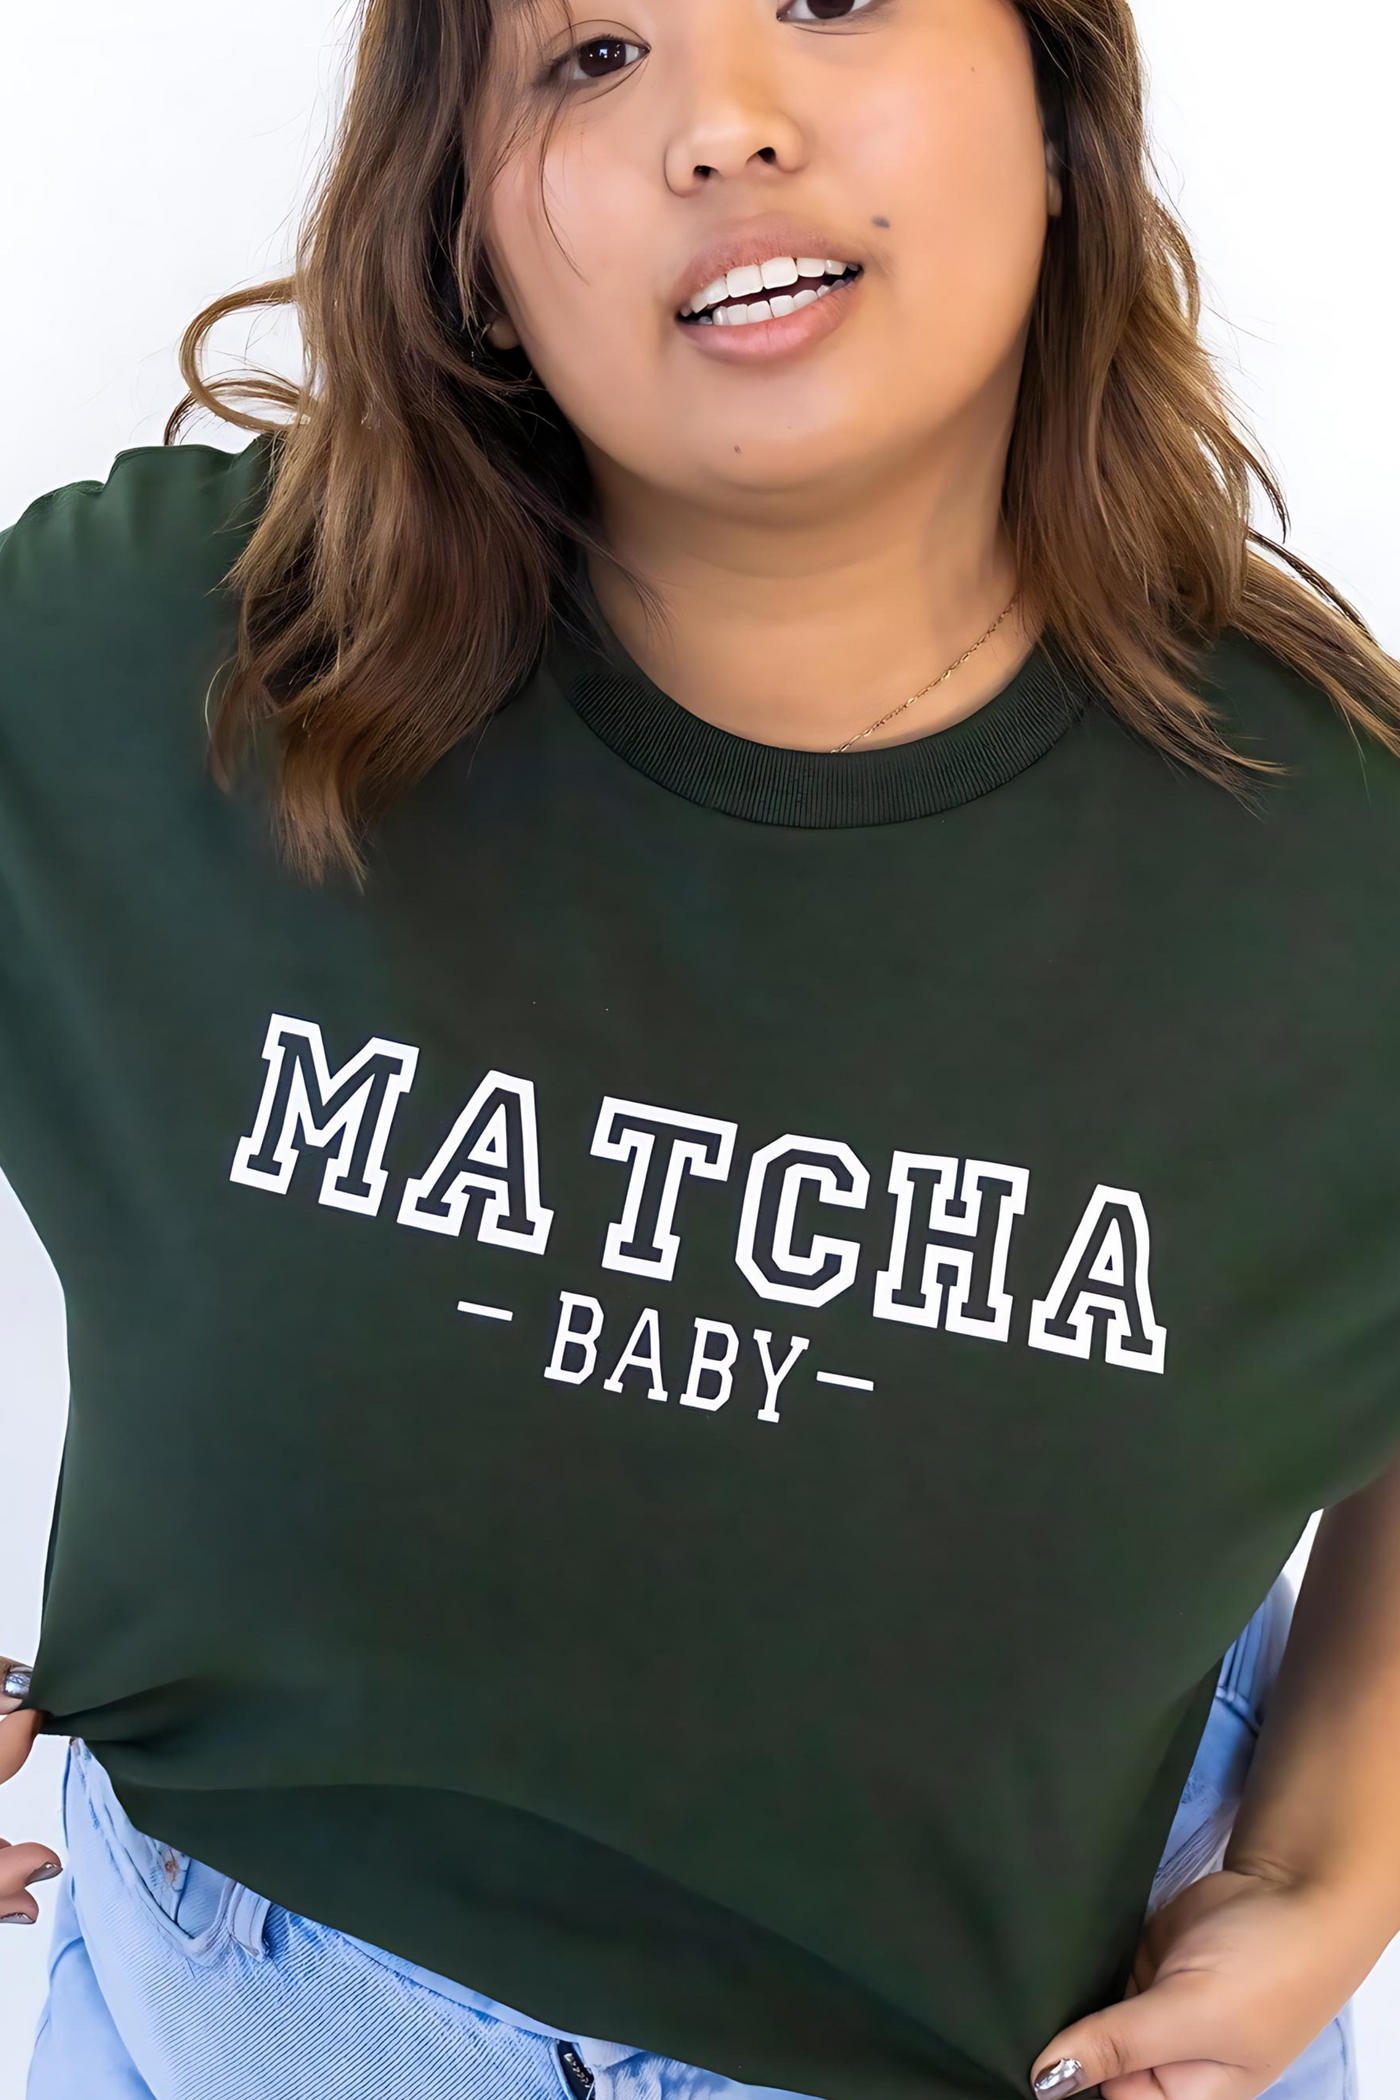 Matcha Lover's Delight: Premium Matcha baby T-shirt - A Perfect Gift for Matcha Tea Enthusiasts